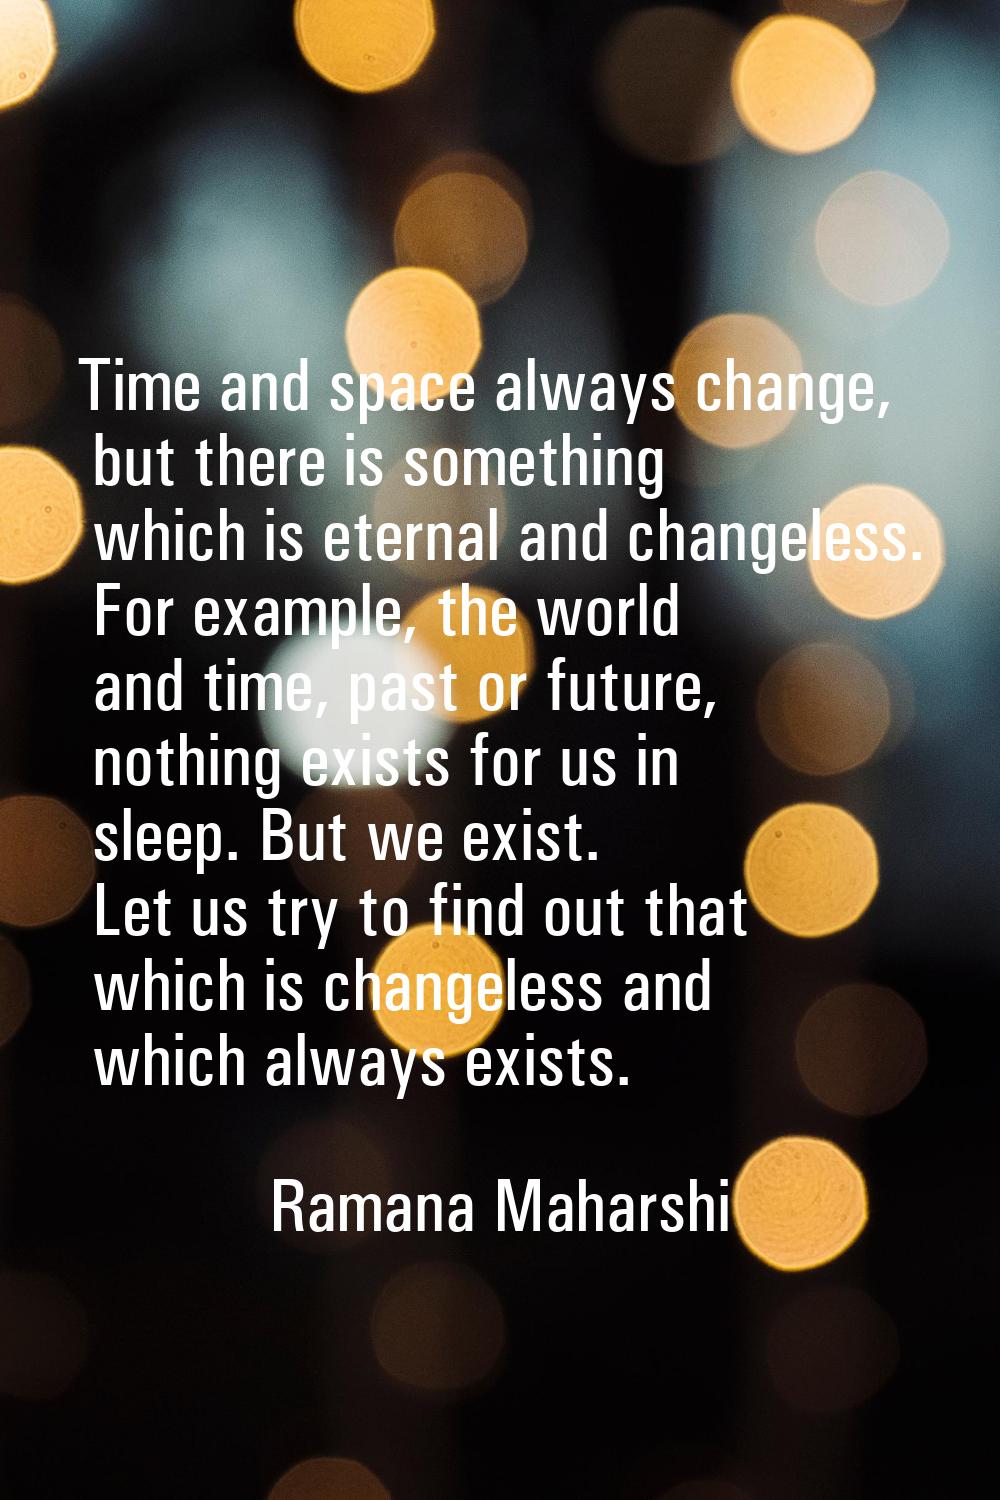 Time and space always change, but there is something which is eternal and changeless. For example, 